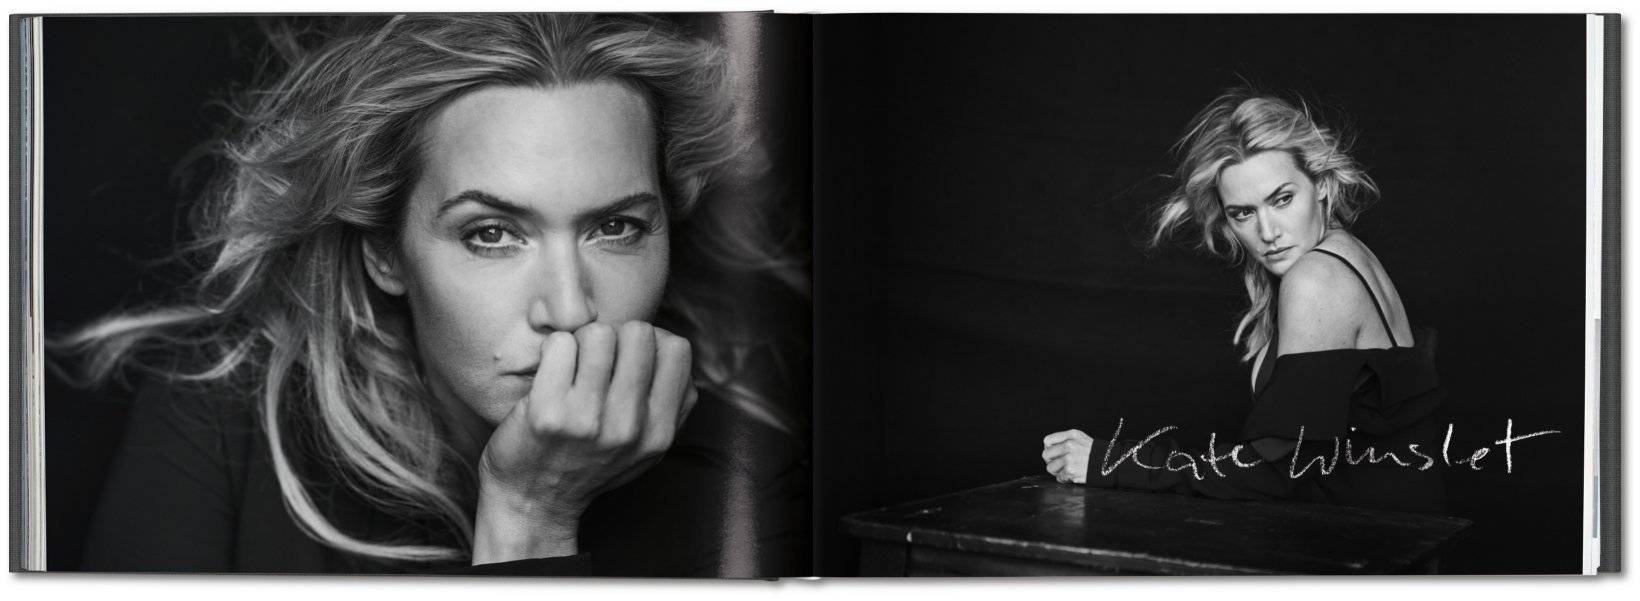 “Shadows on the Wall” : les actrices sous l’objectif de Peter Lindbergh